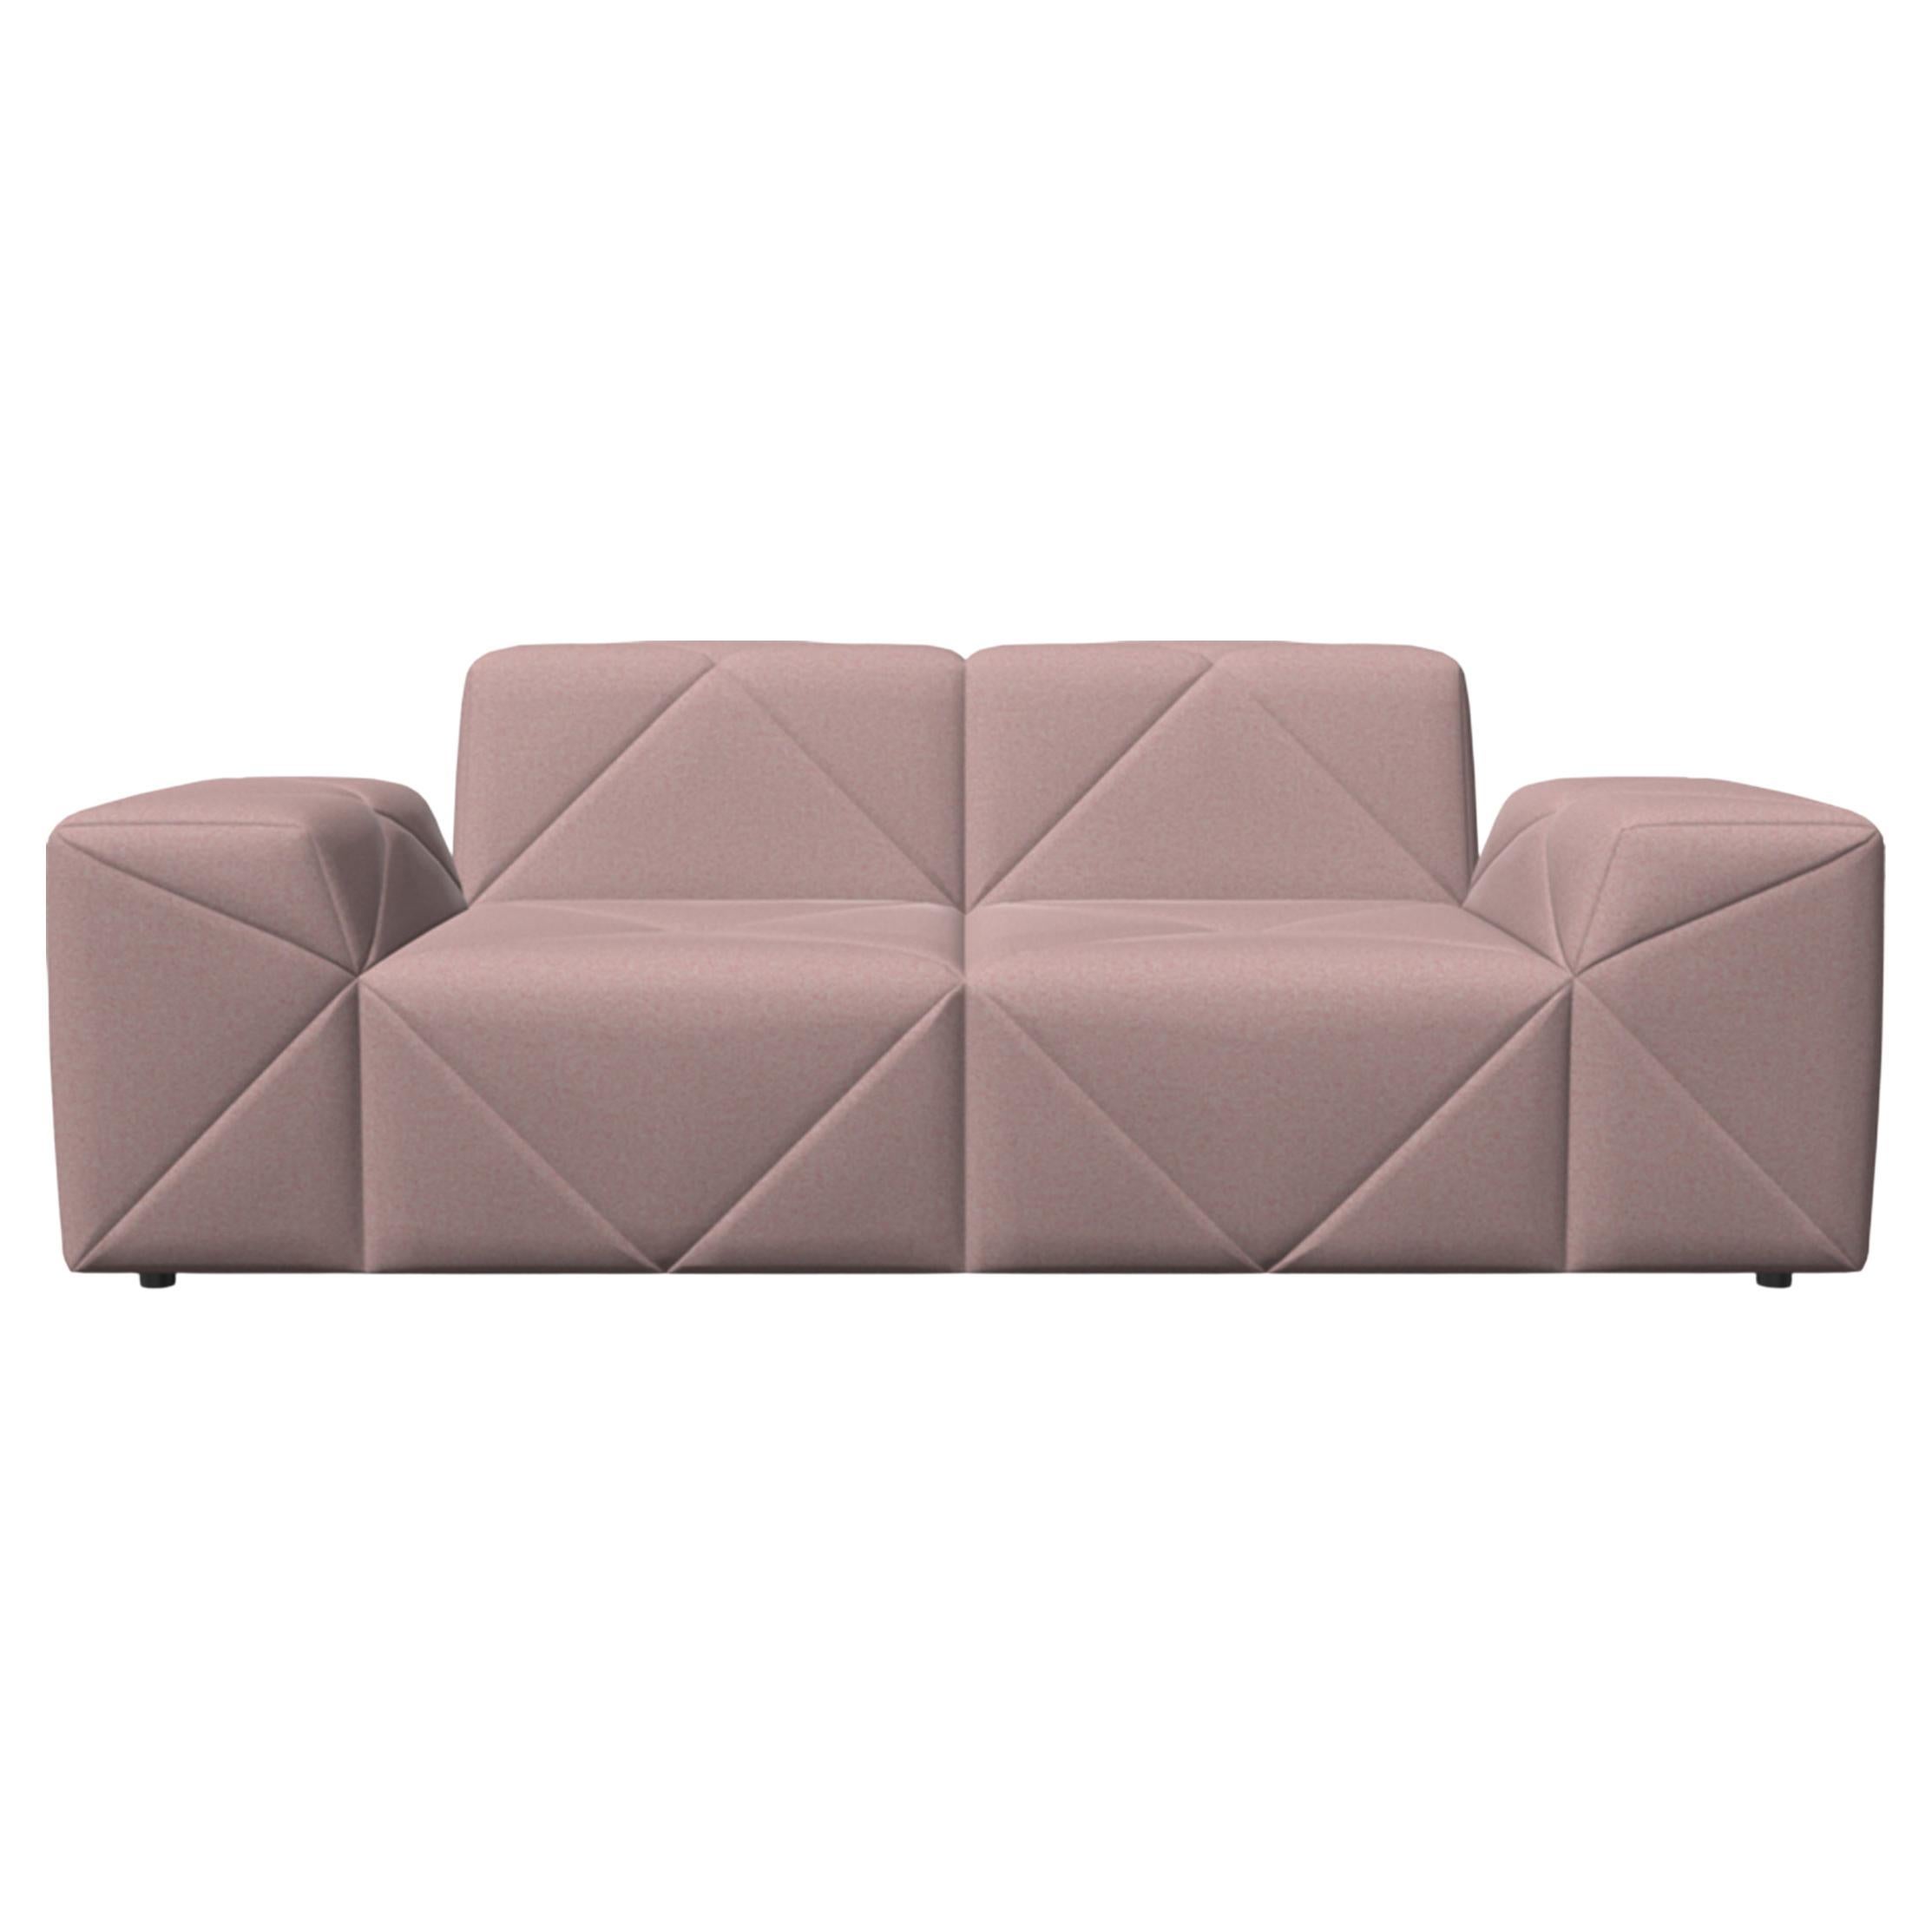 Moooi BFF Double Seater DE01 Low Sofa in Divina MD, 613 Pink Upholstery